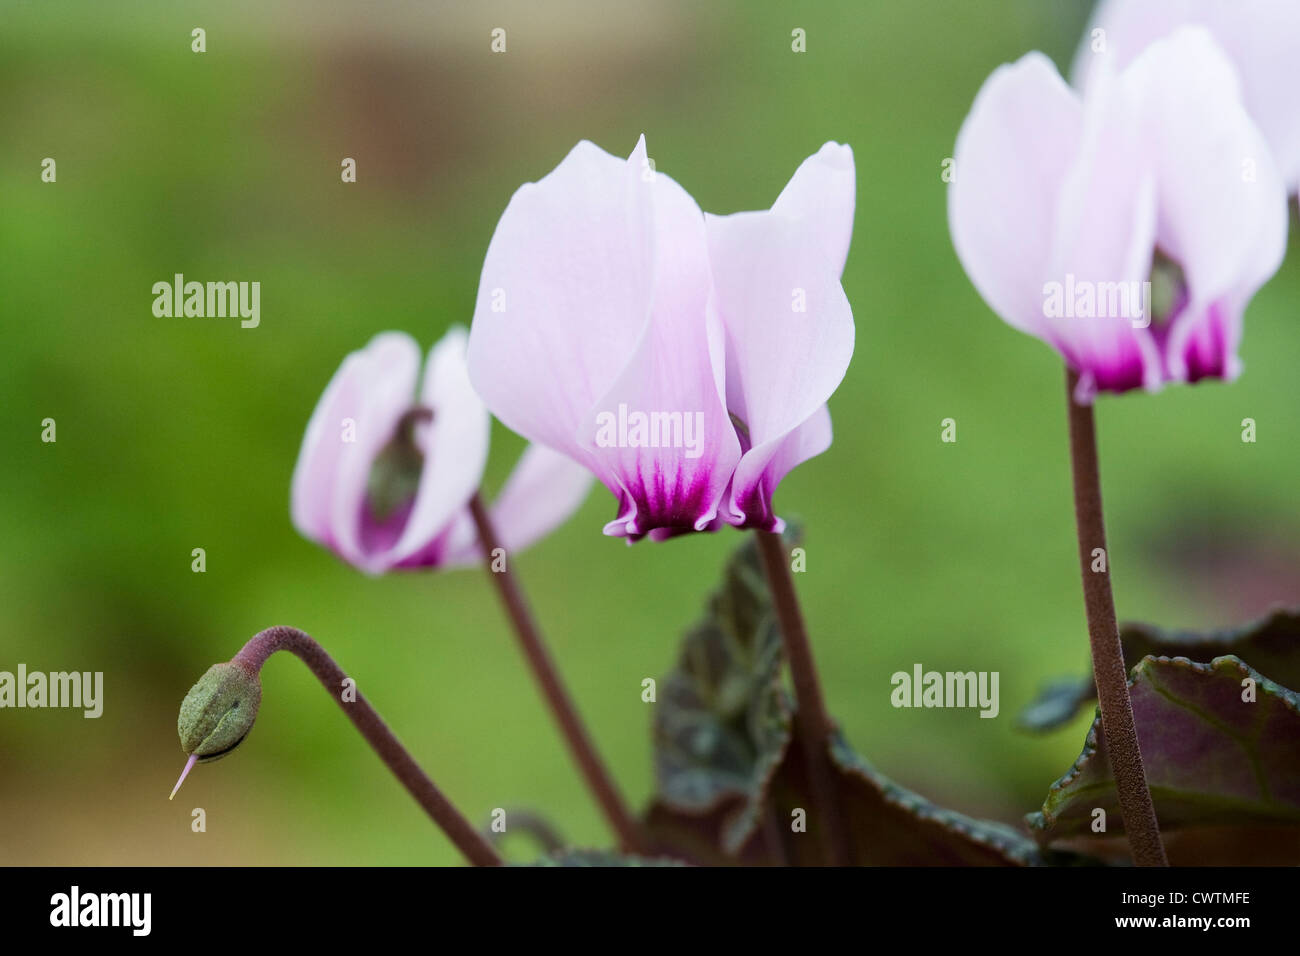 Cyclamen graecum flowers growing in a protected environment. Stock Photo